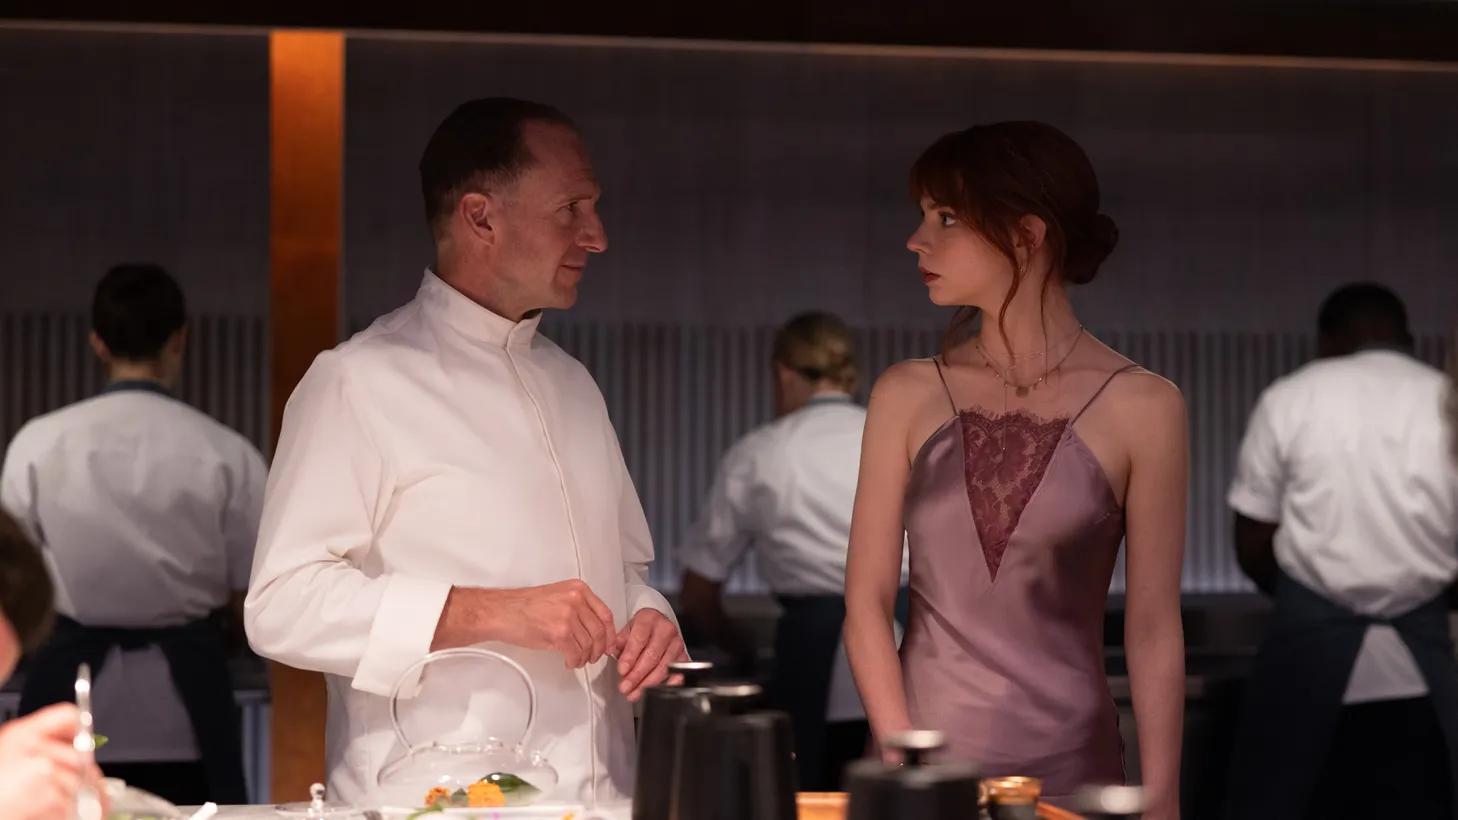 Ralph Fiennes (left) plays Julian Slowik, a chef looking to exact revenge on both his critics and acolytes in "The Menu." The actor and Anya Taylor-Joy were both nominated for Golden Globes for their roles.